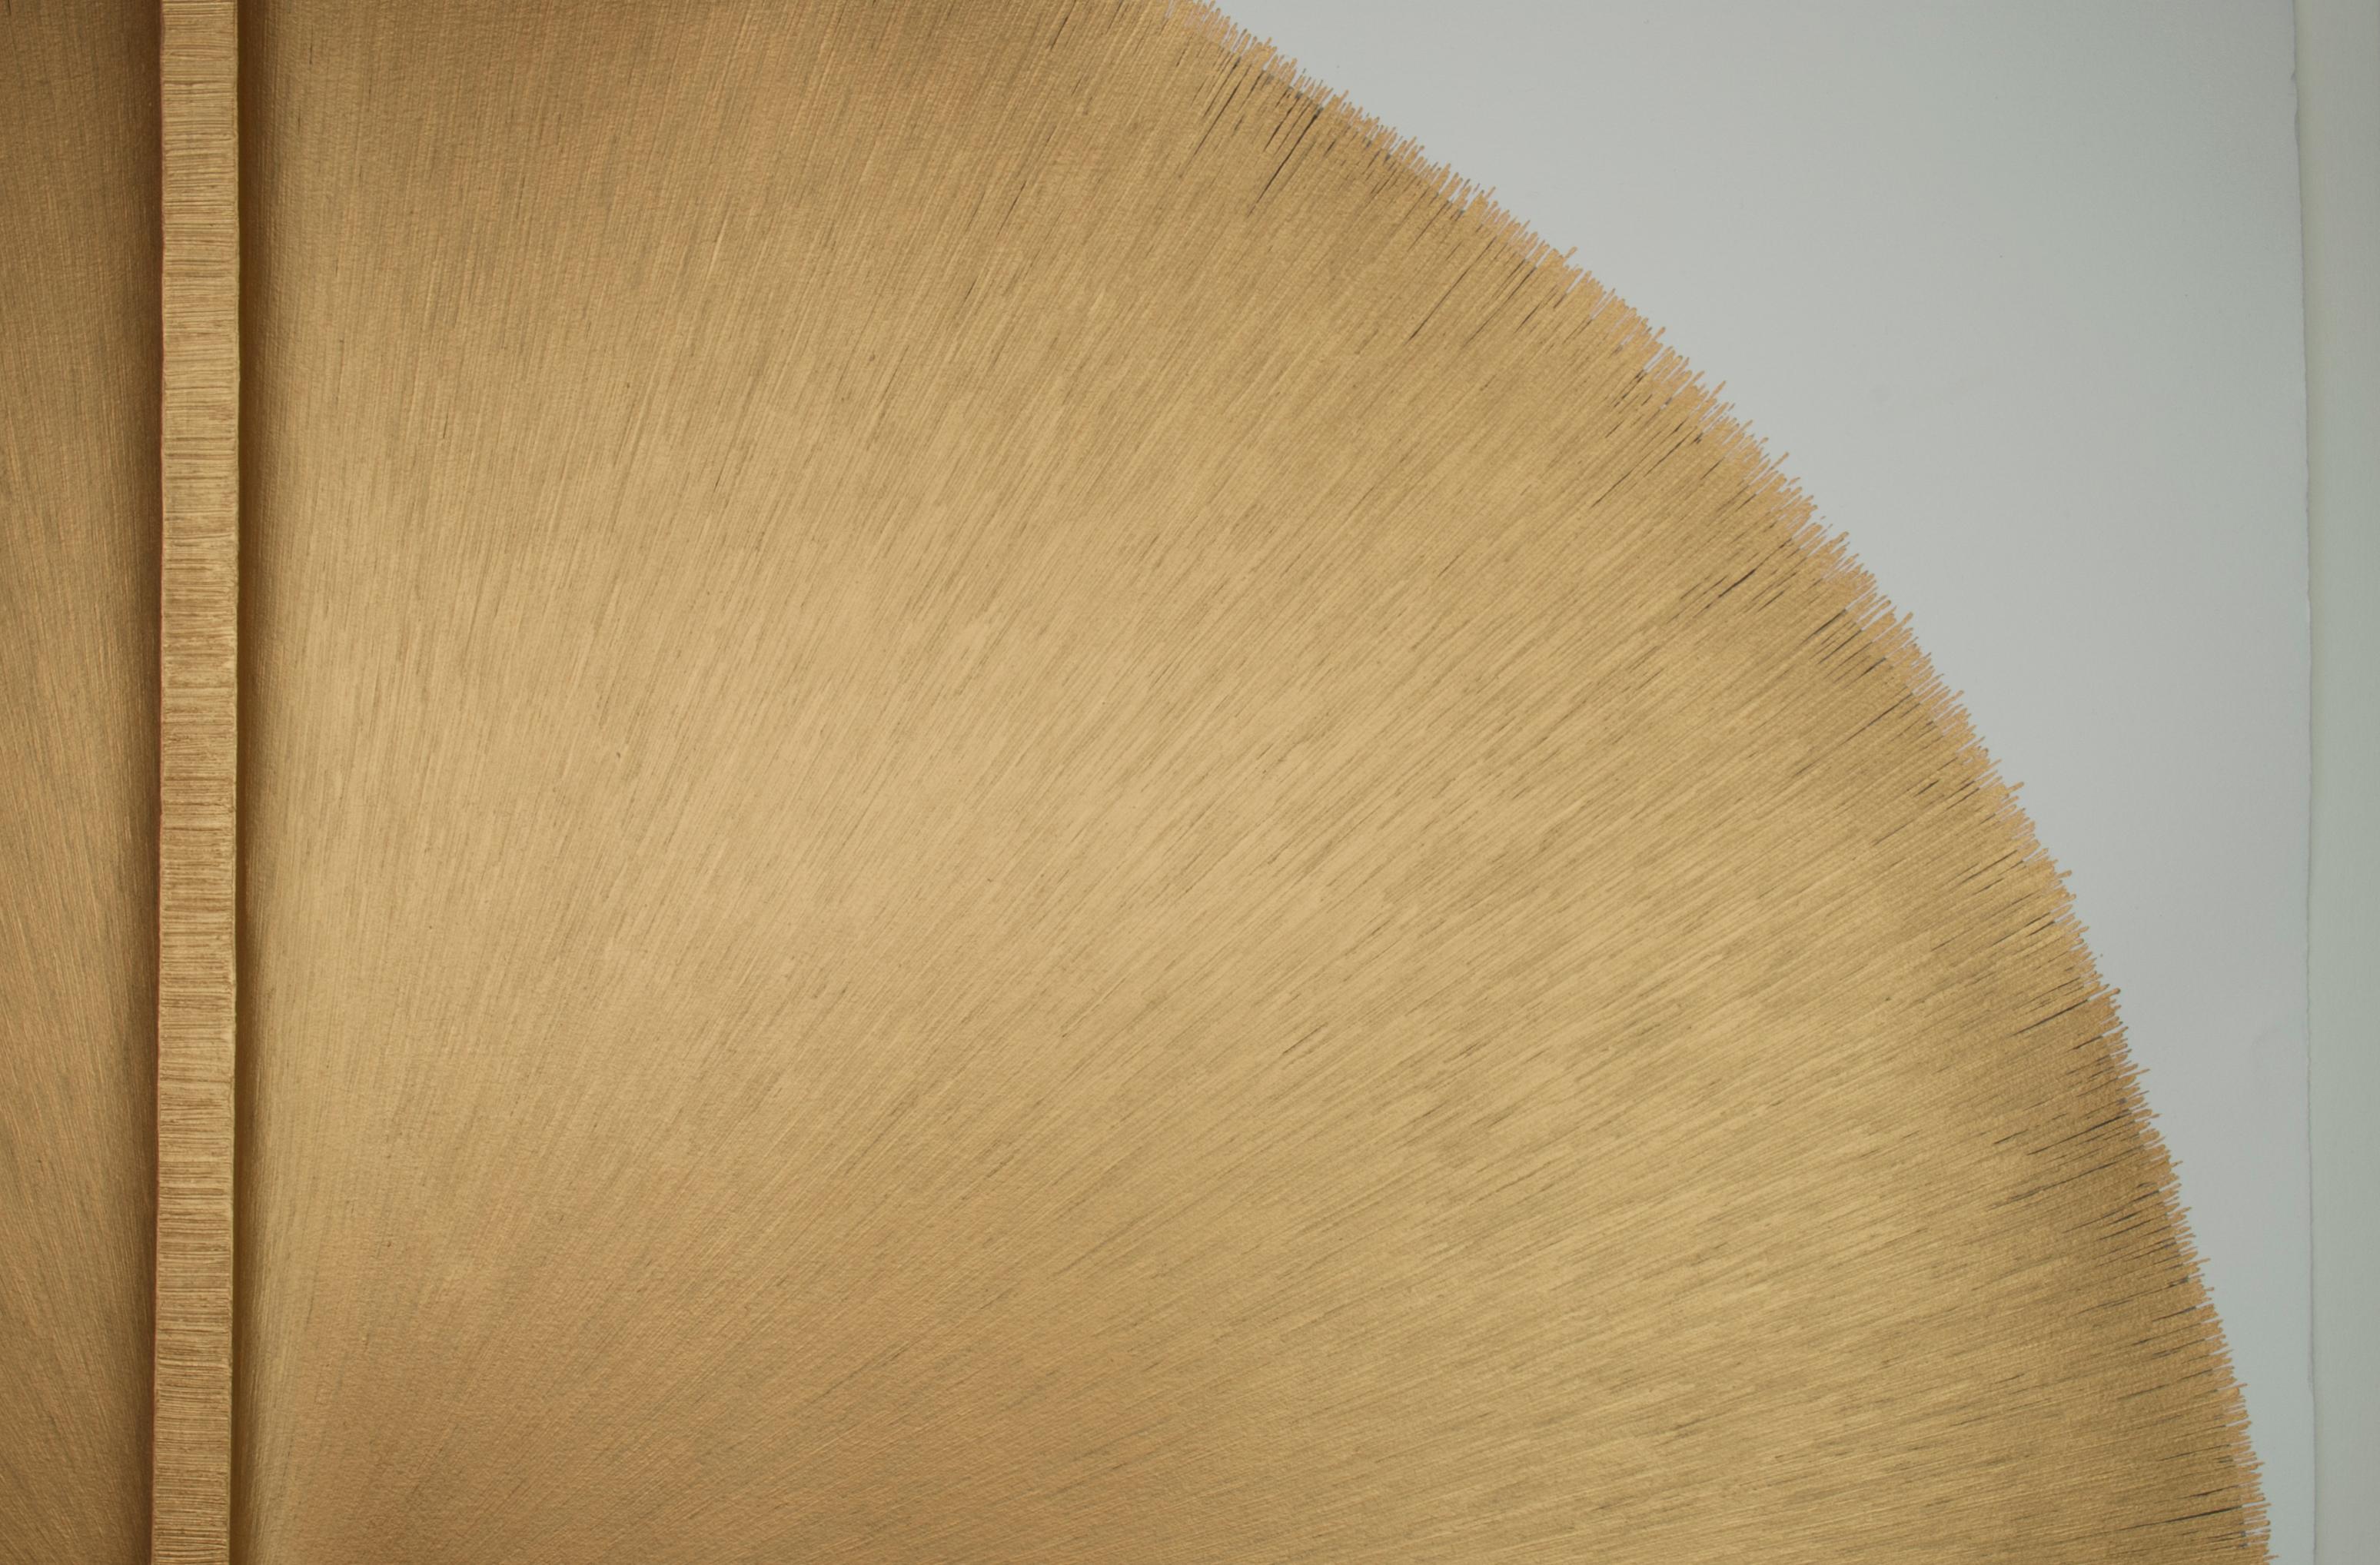 Solid Rod XV: Large, Gold Circular Painting by Silvia Lerin 2